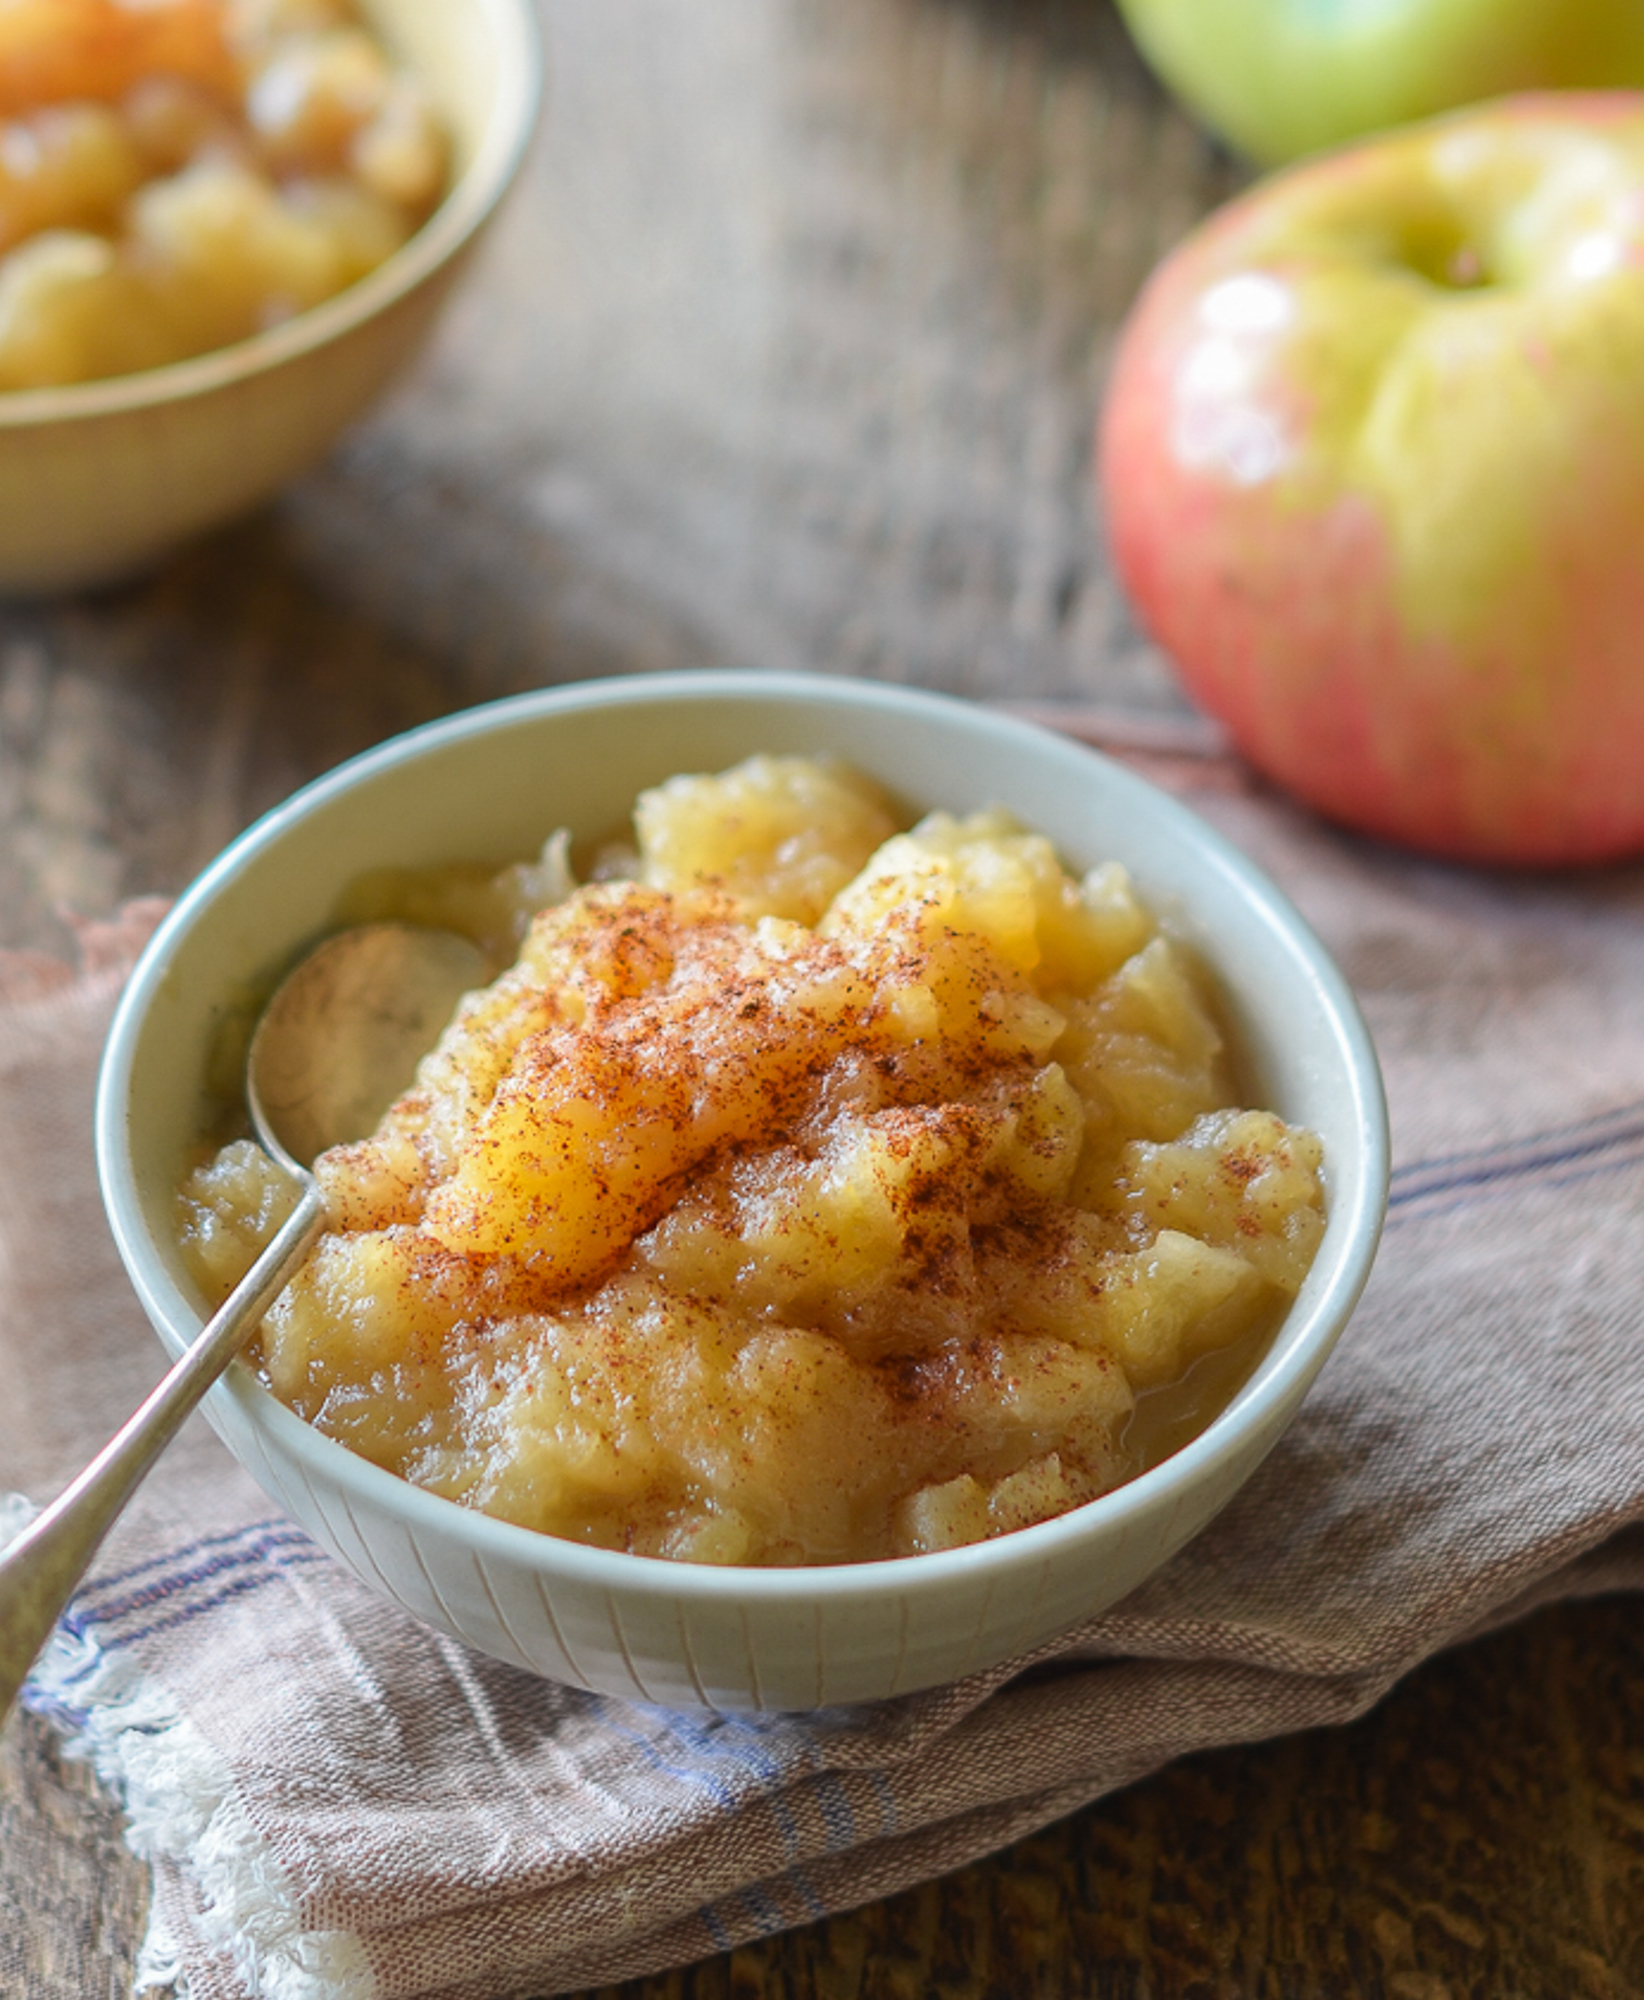 What to Make With Apples Today